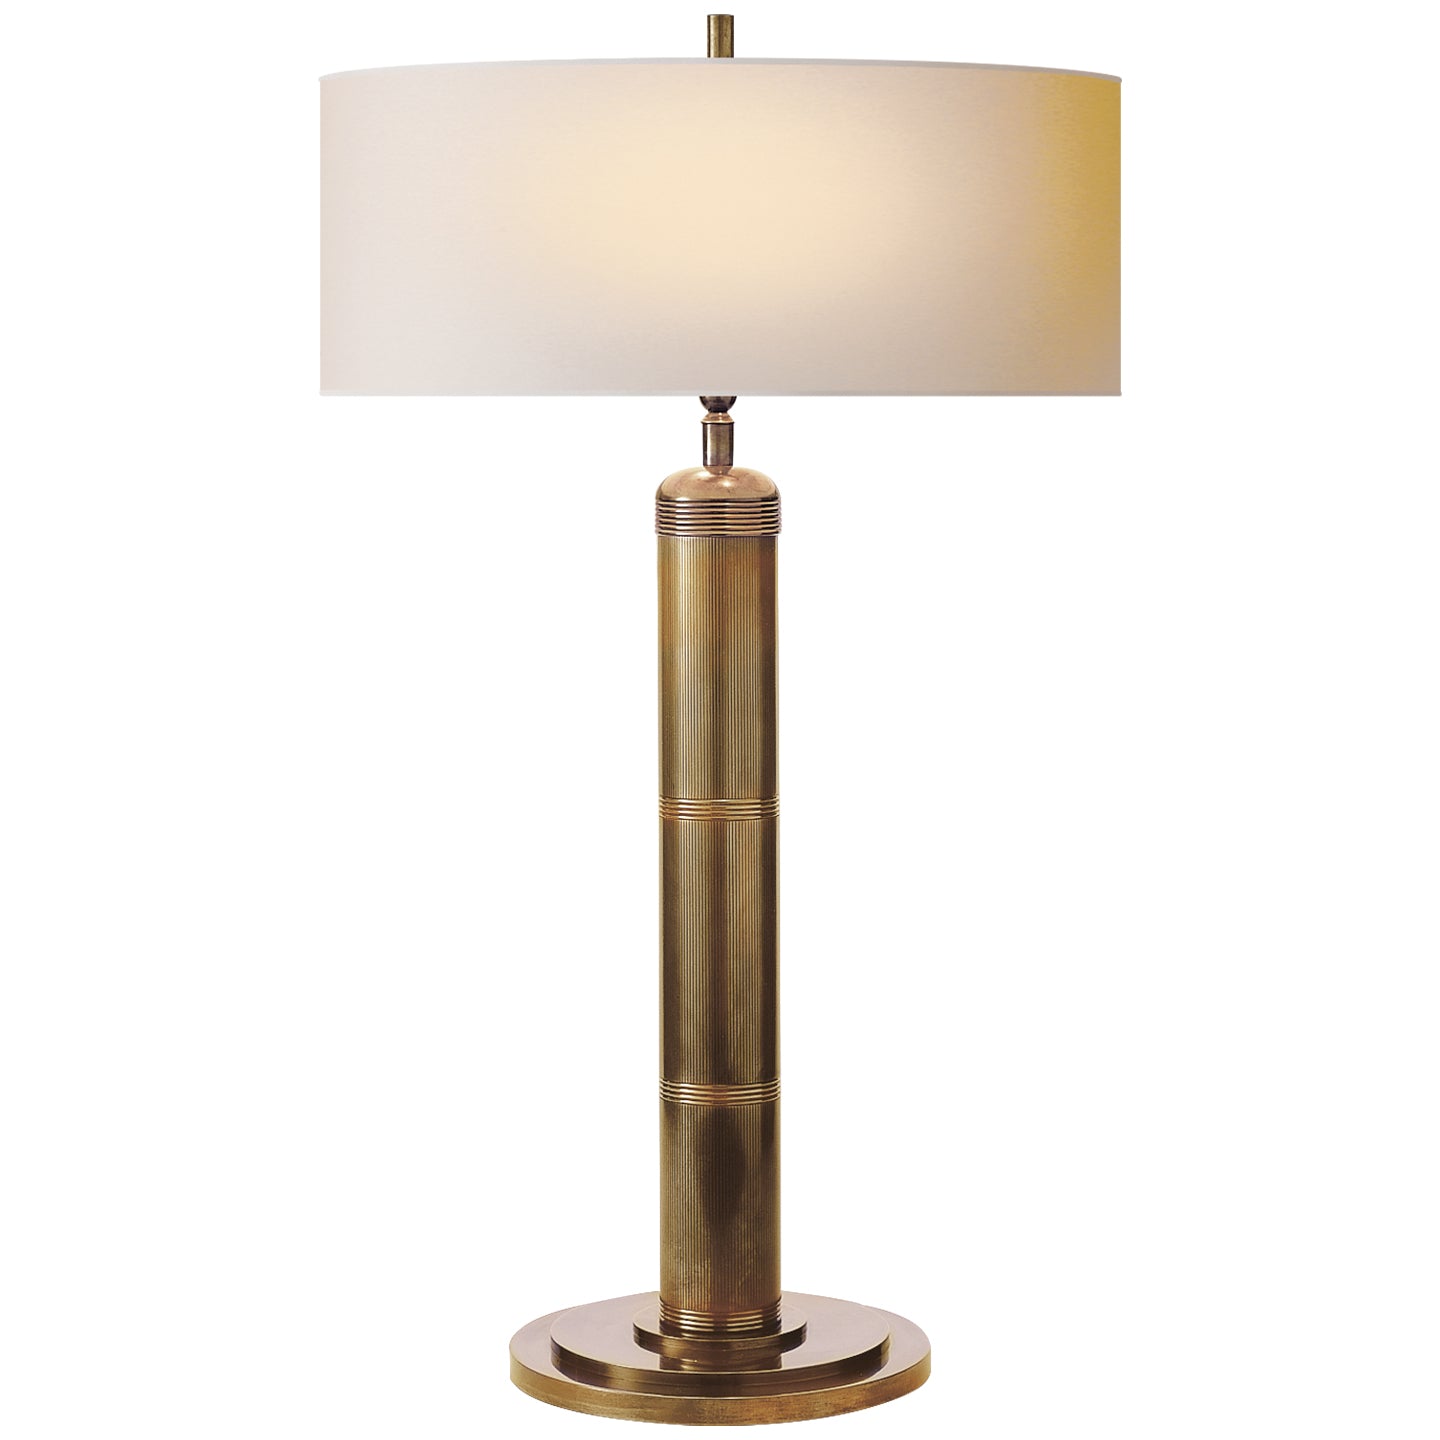  This high table lamp is a perfect decorative element to set up the ambiance. Amethyst Home provides interior design services, furniture, rugs, and lighting in the Kansas City metro area.